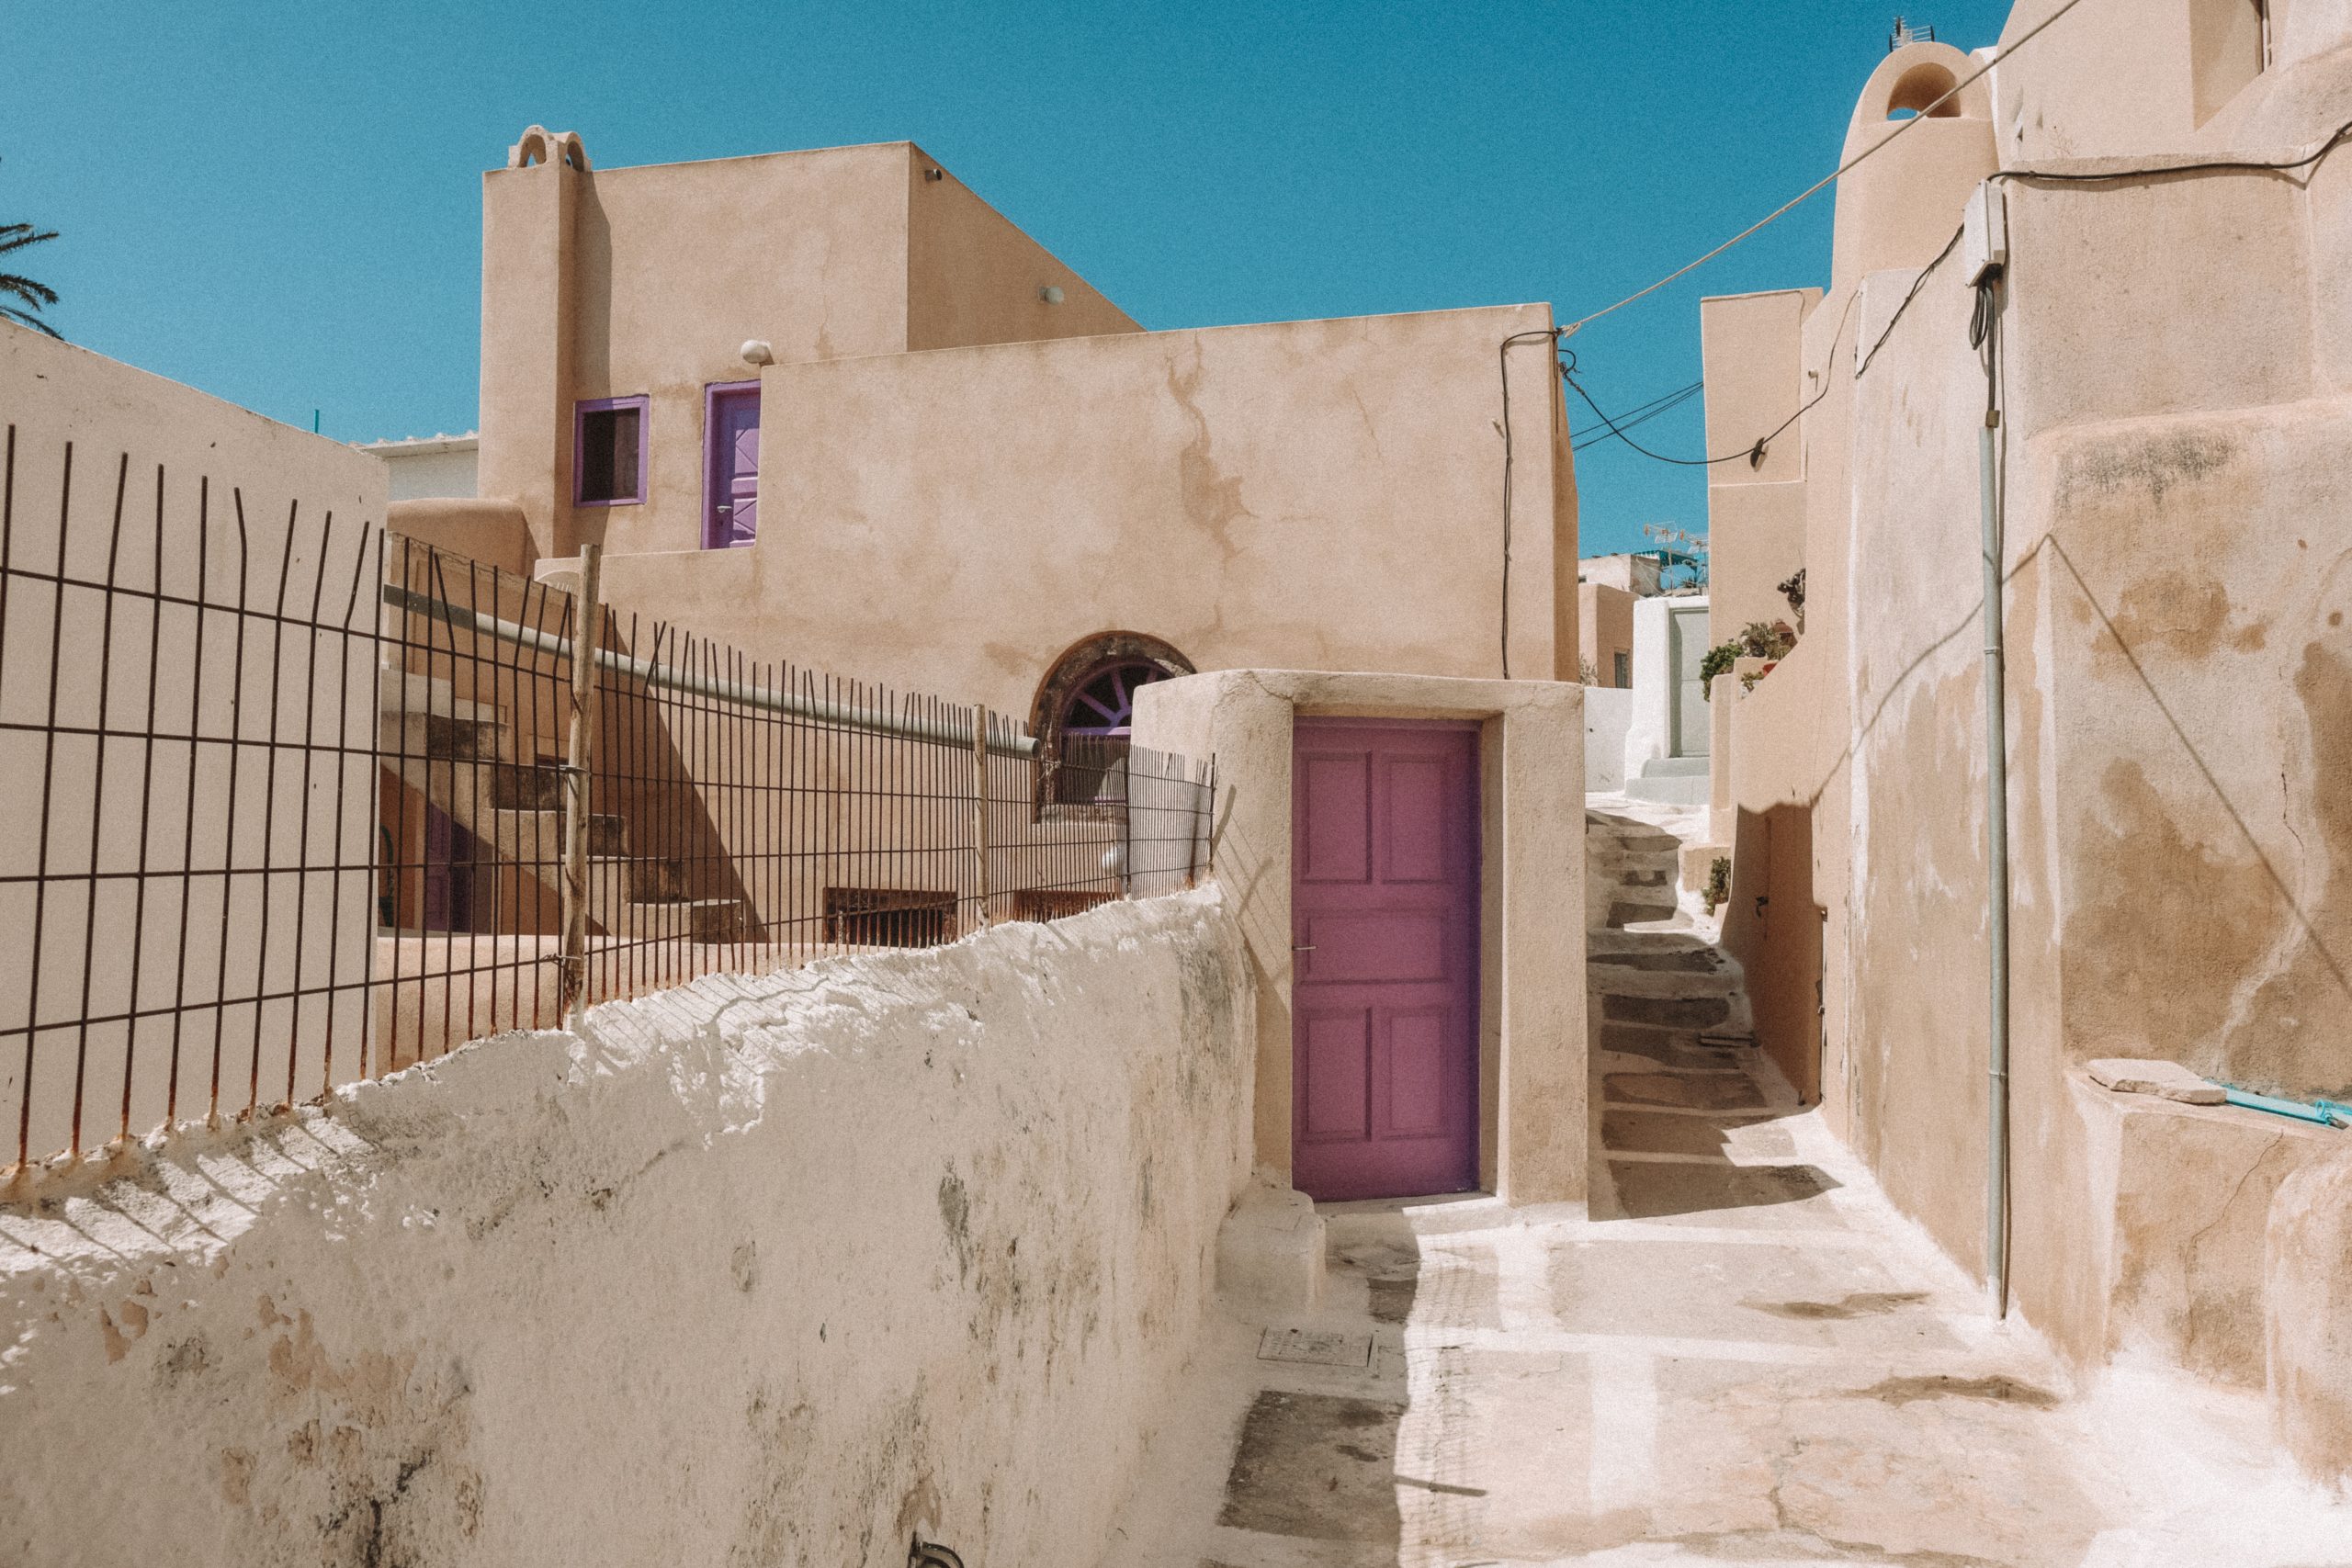 Village alleyway in Emporio with peach washed houses and purple doors. Things to do in Santorini